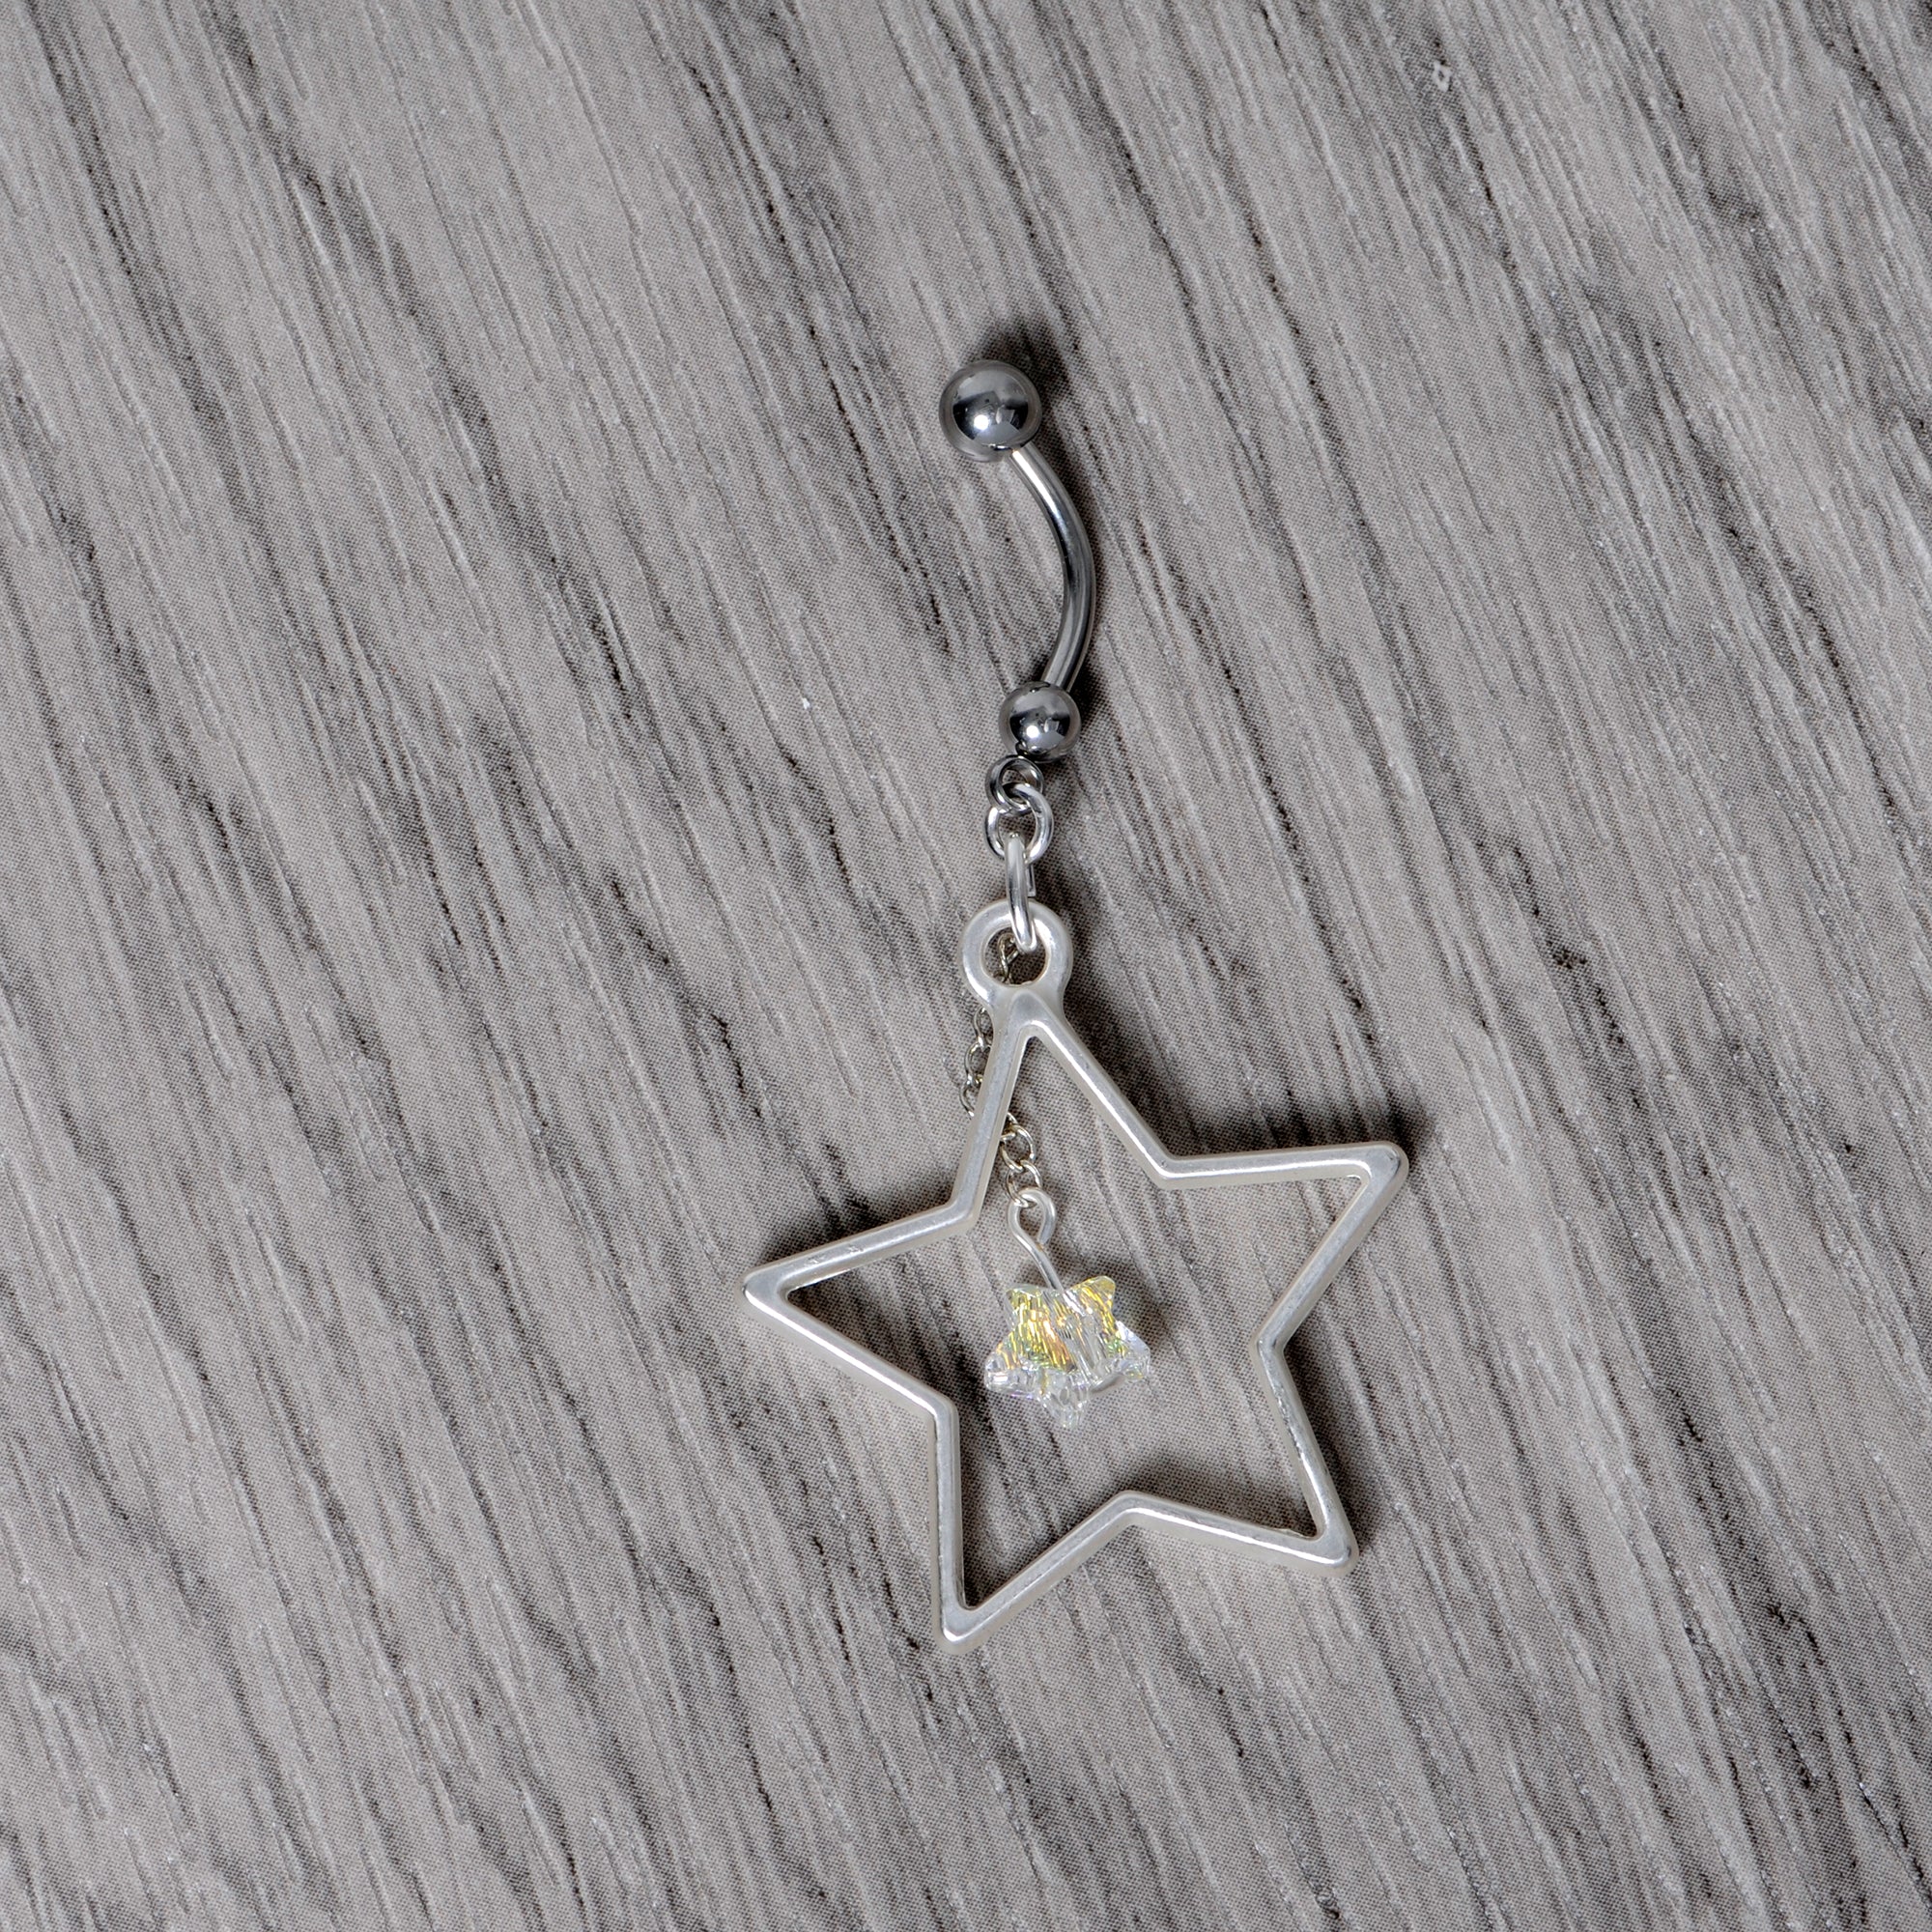 Handmade Starlight Dangle Belly Ring Created with Crystals